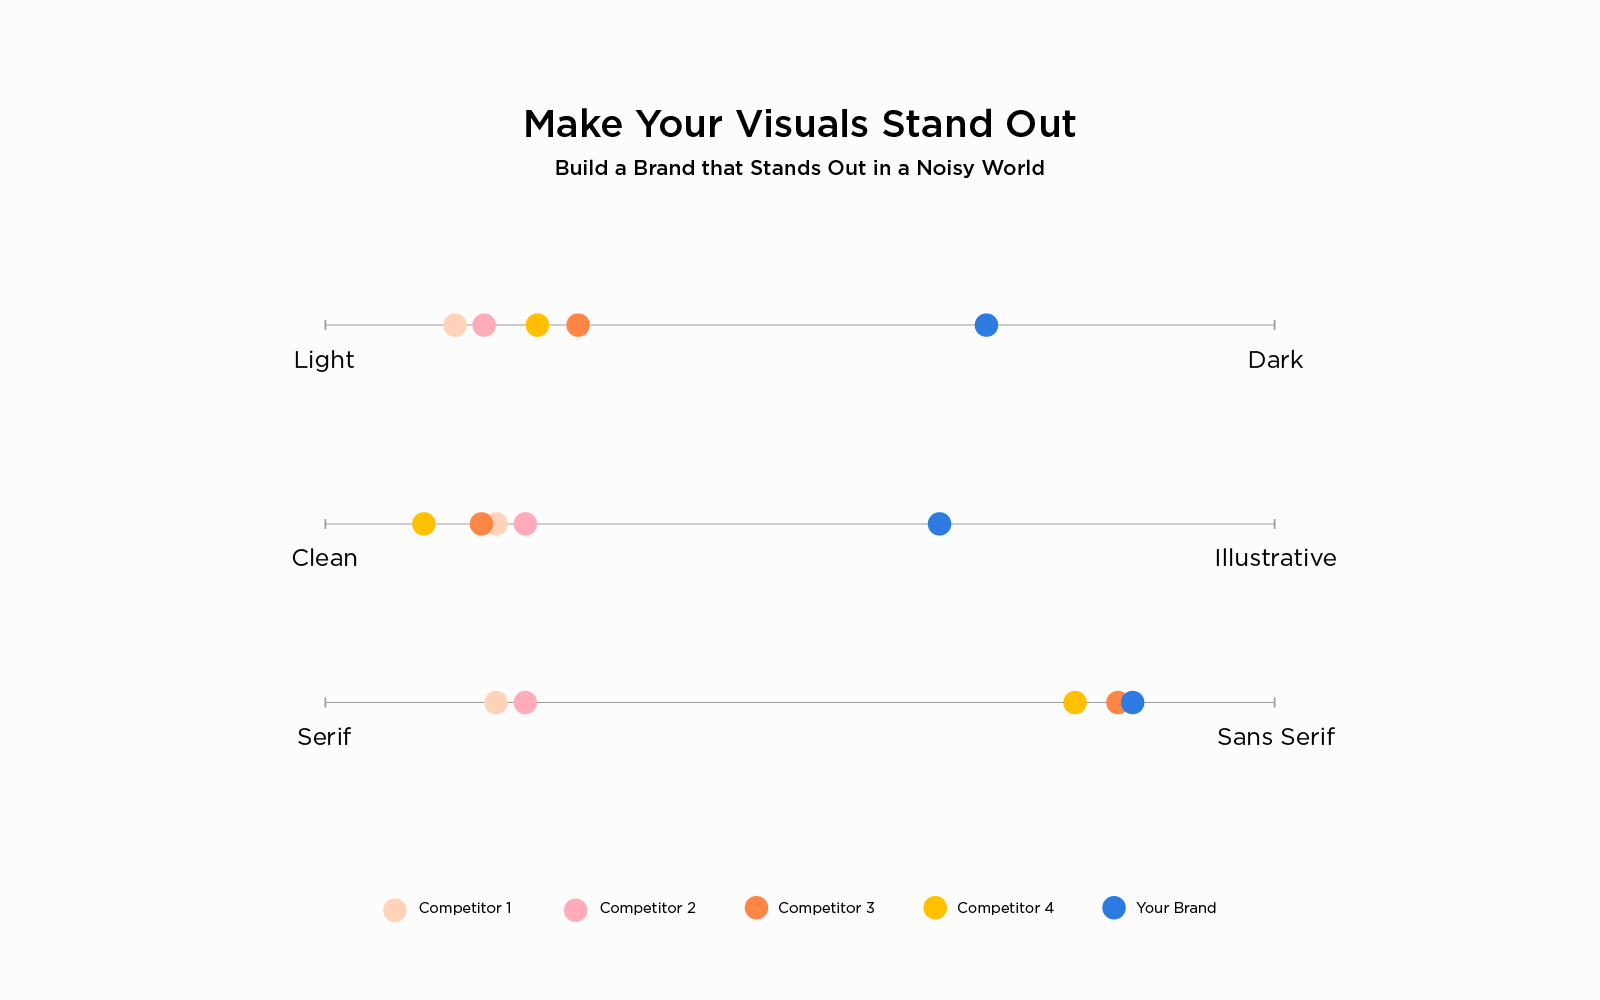 Brand visuals positioning chart to help you stand out from competitors.